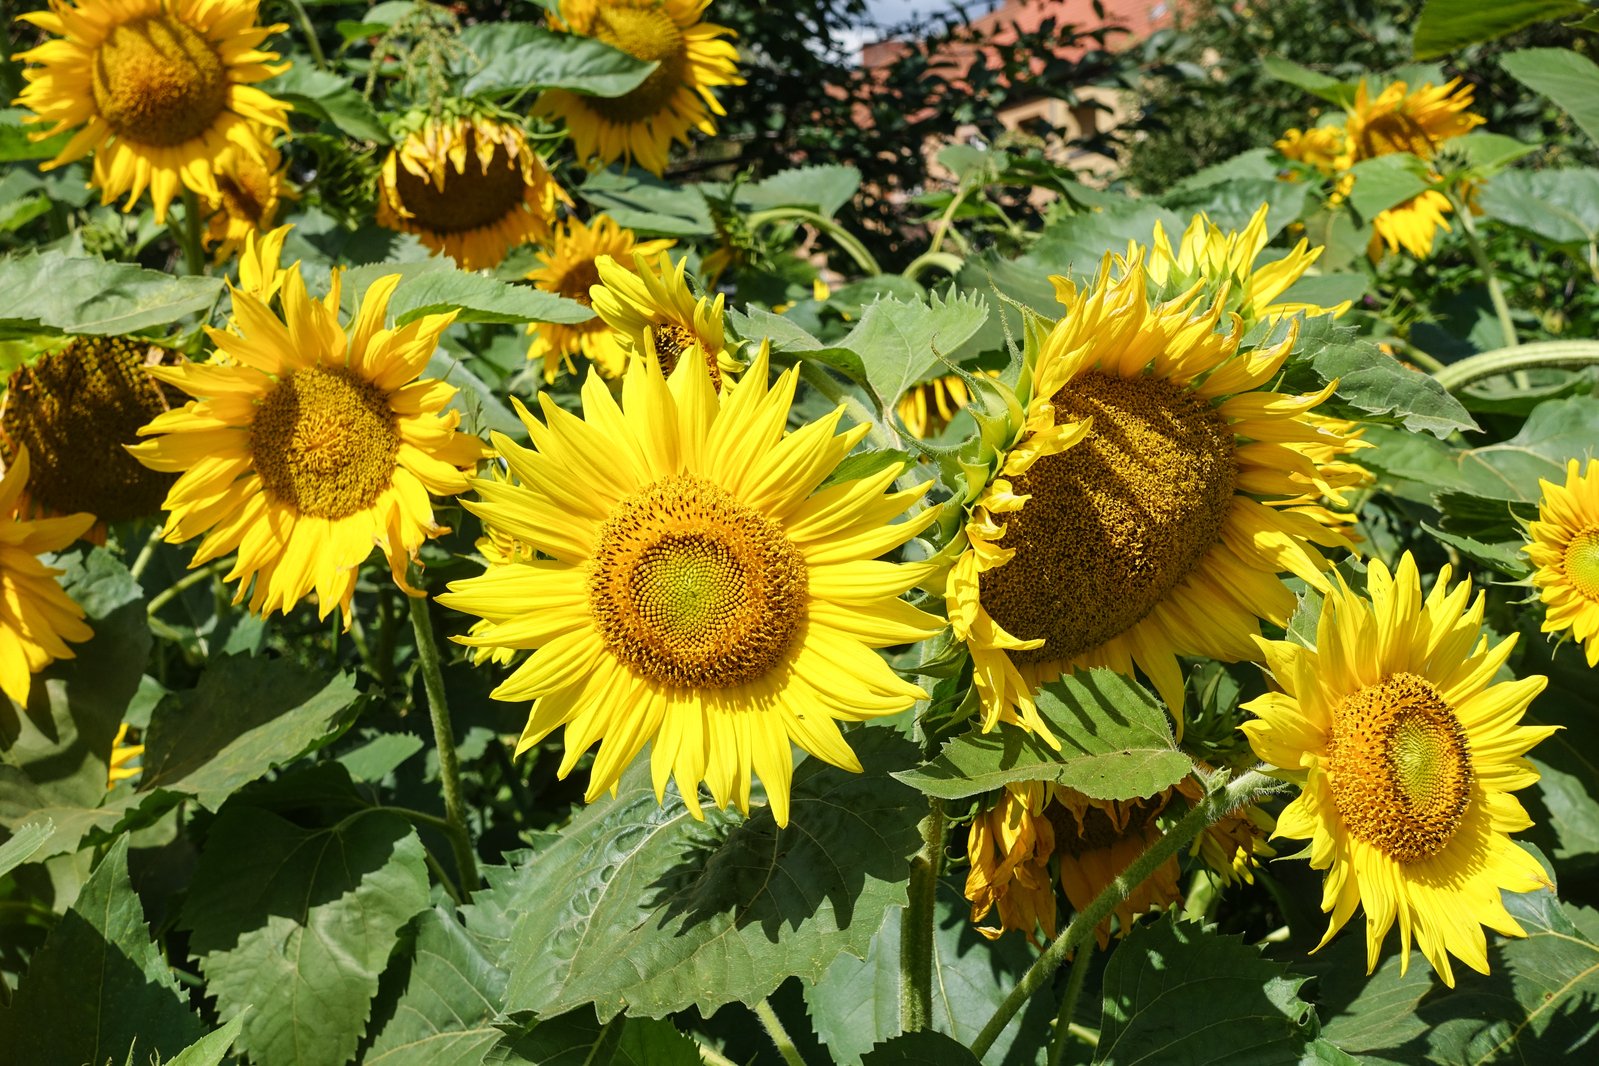 many large sunflowers in bloom with green leaves